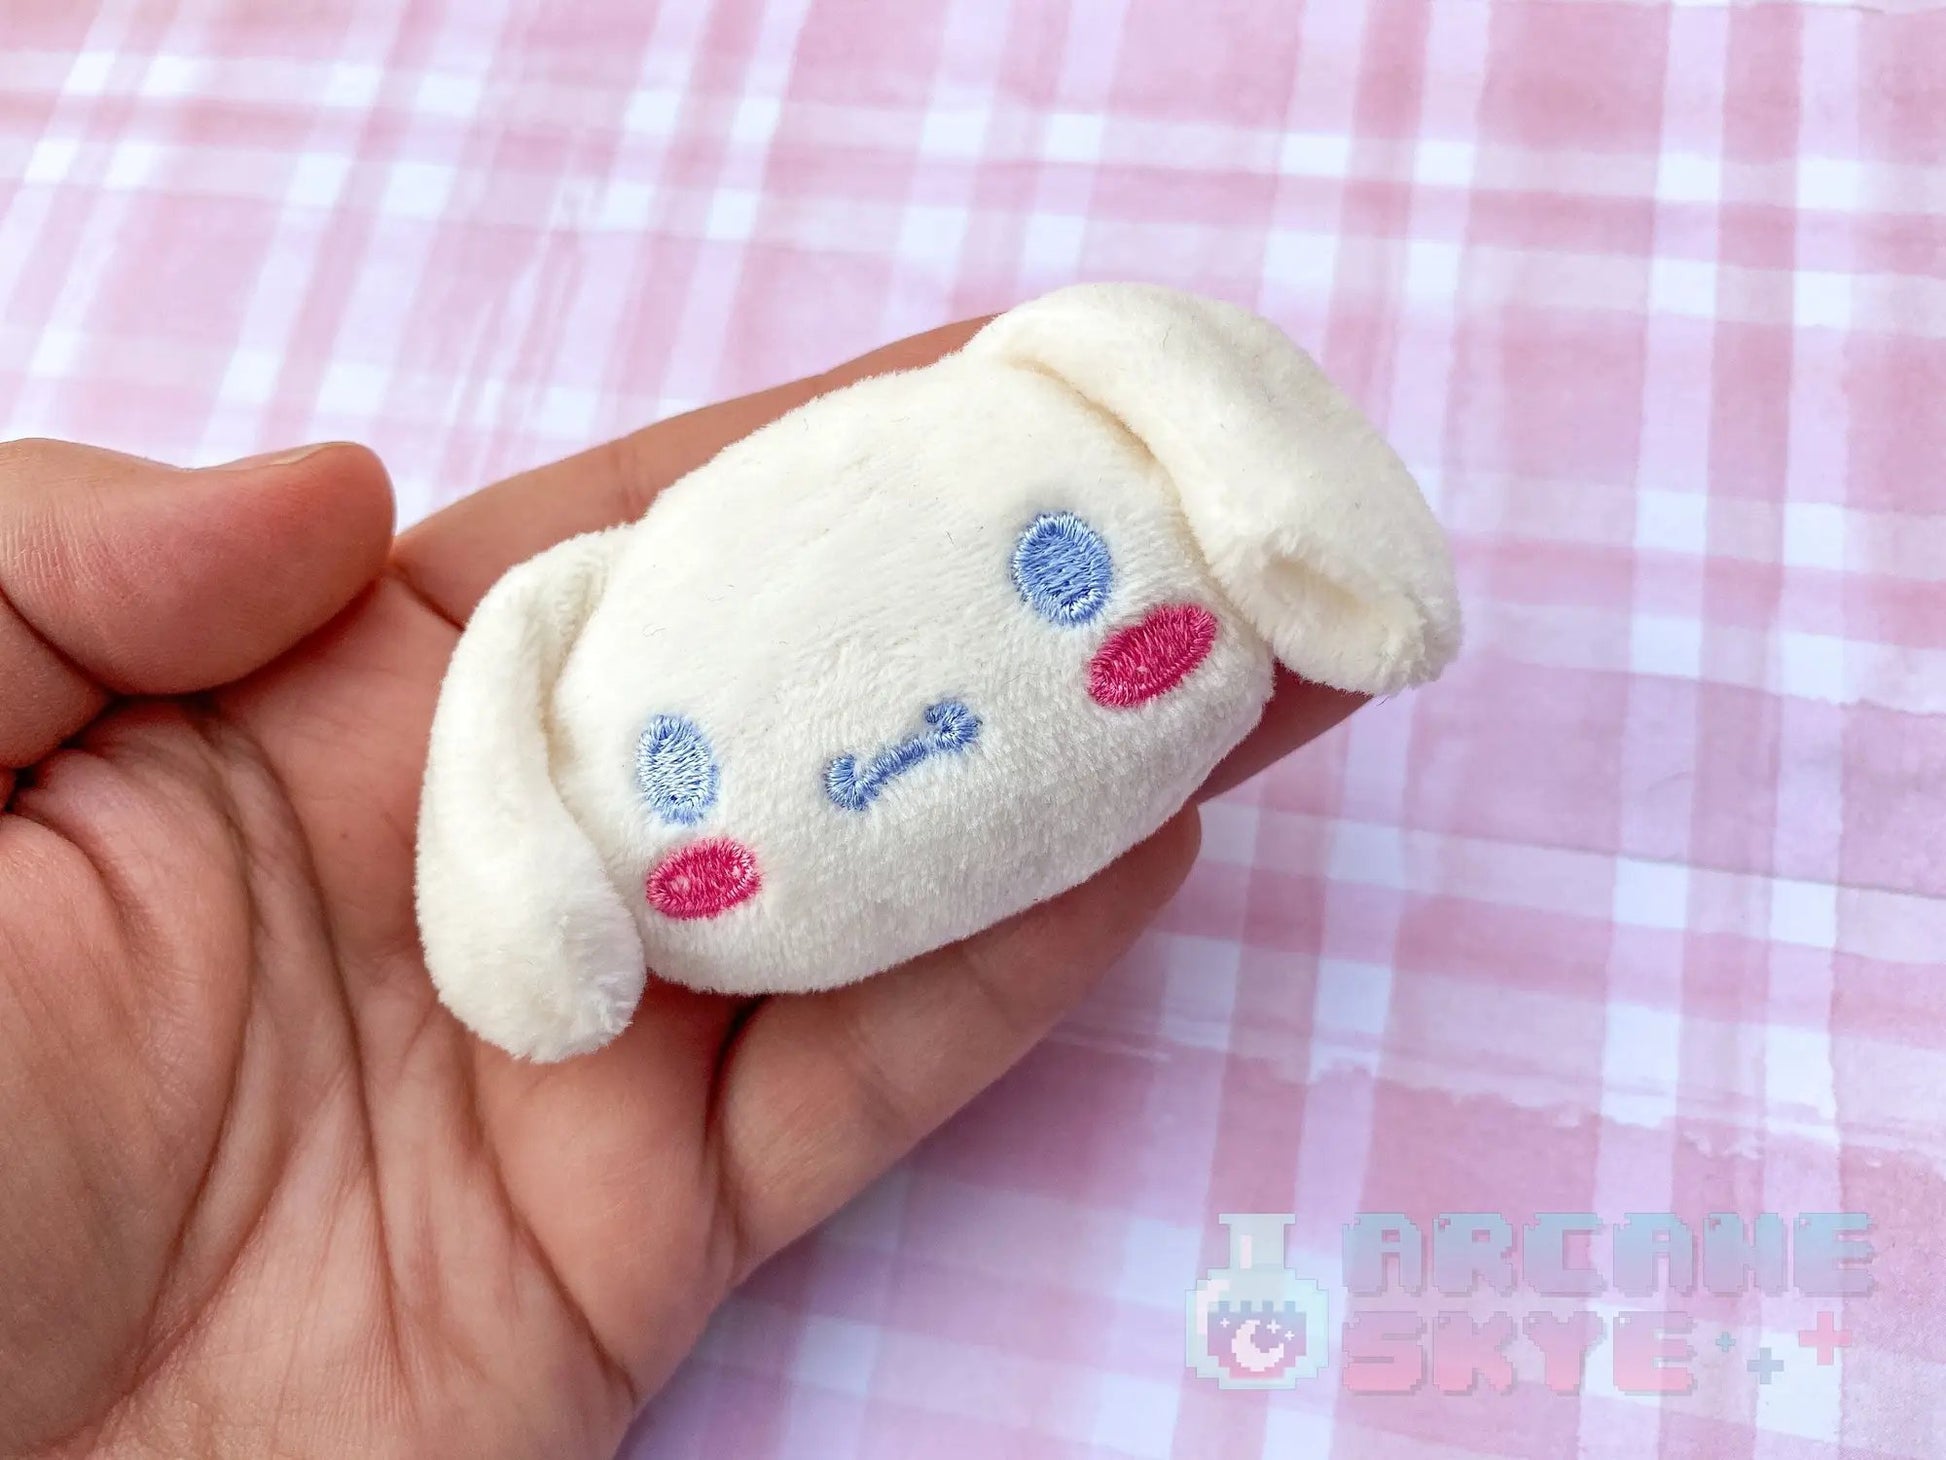 a hand holding a small white stuffed animal